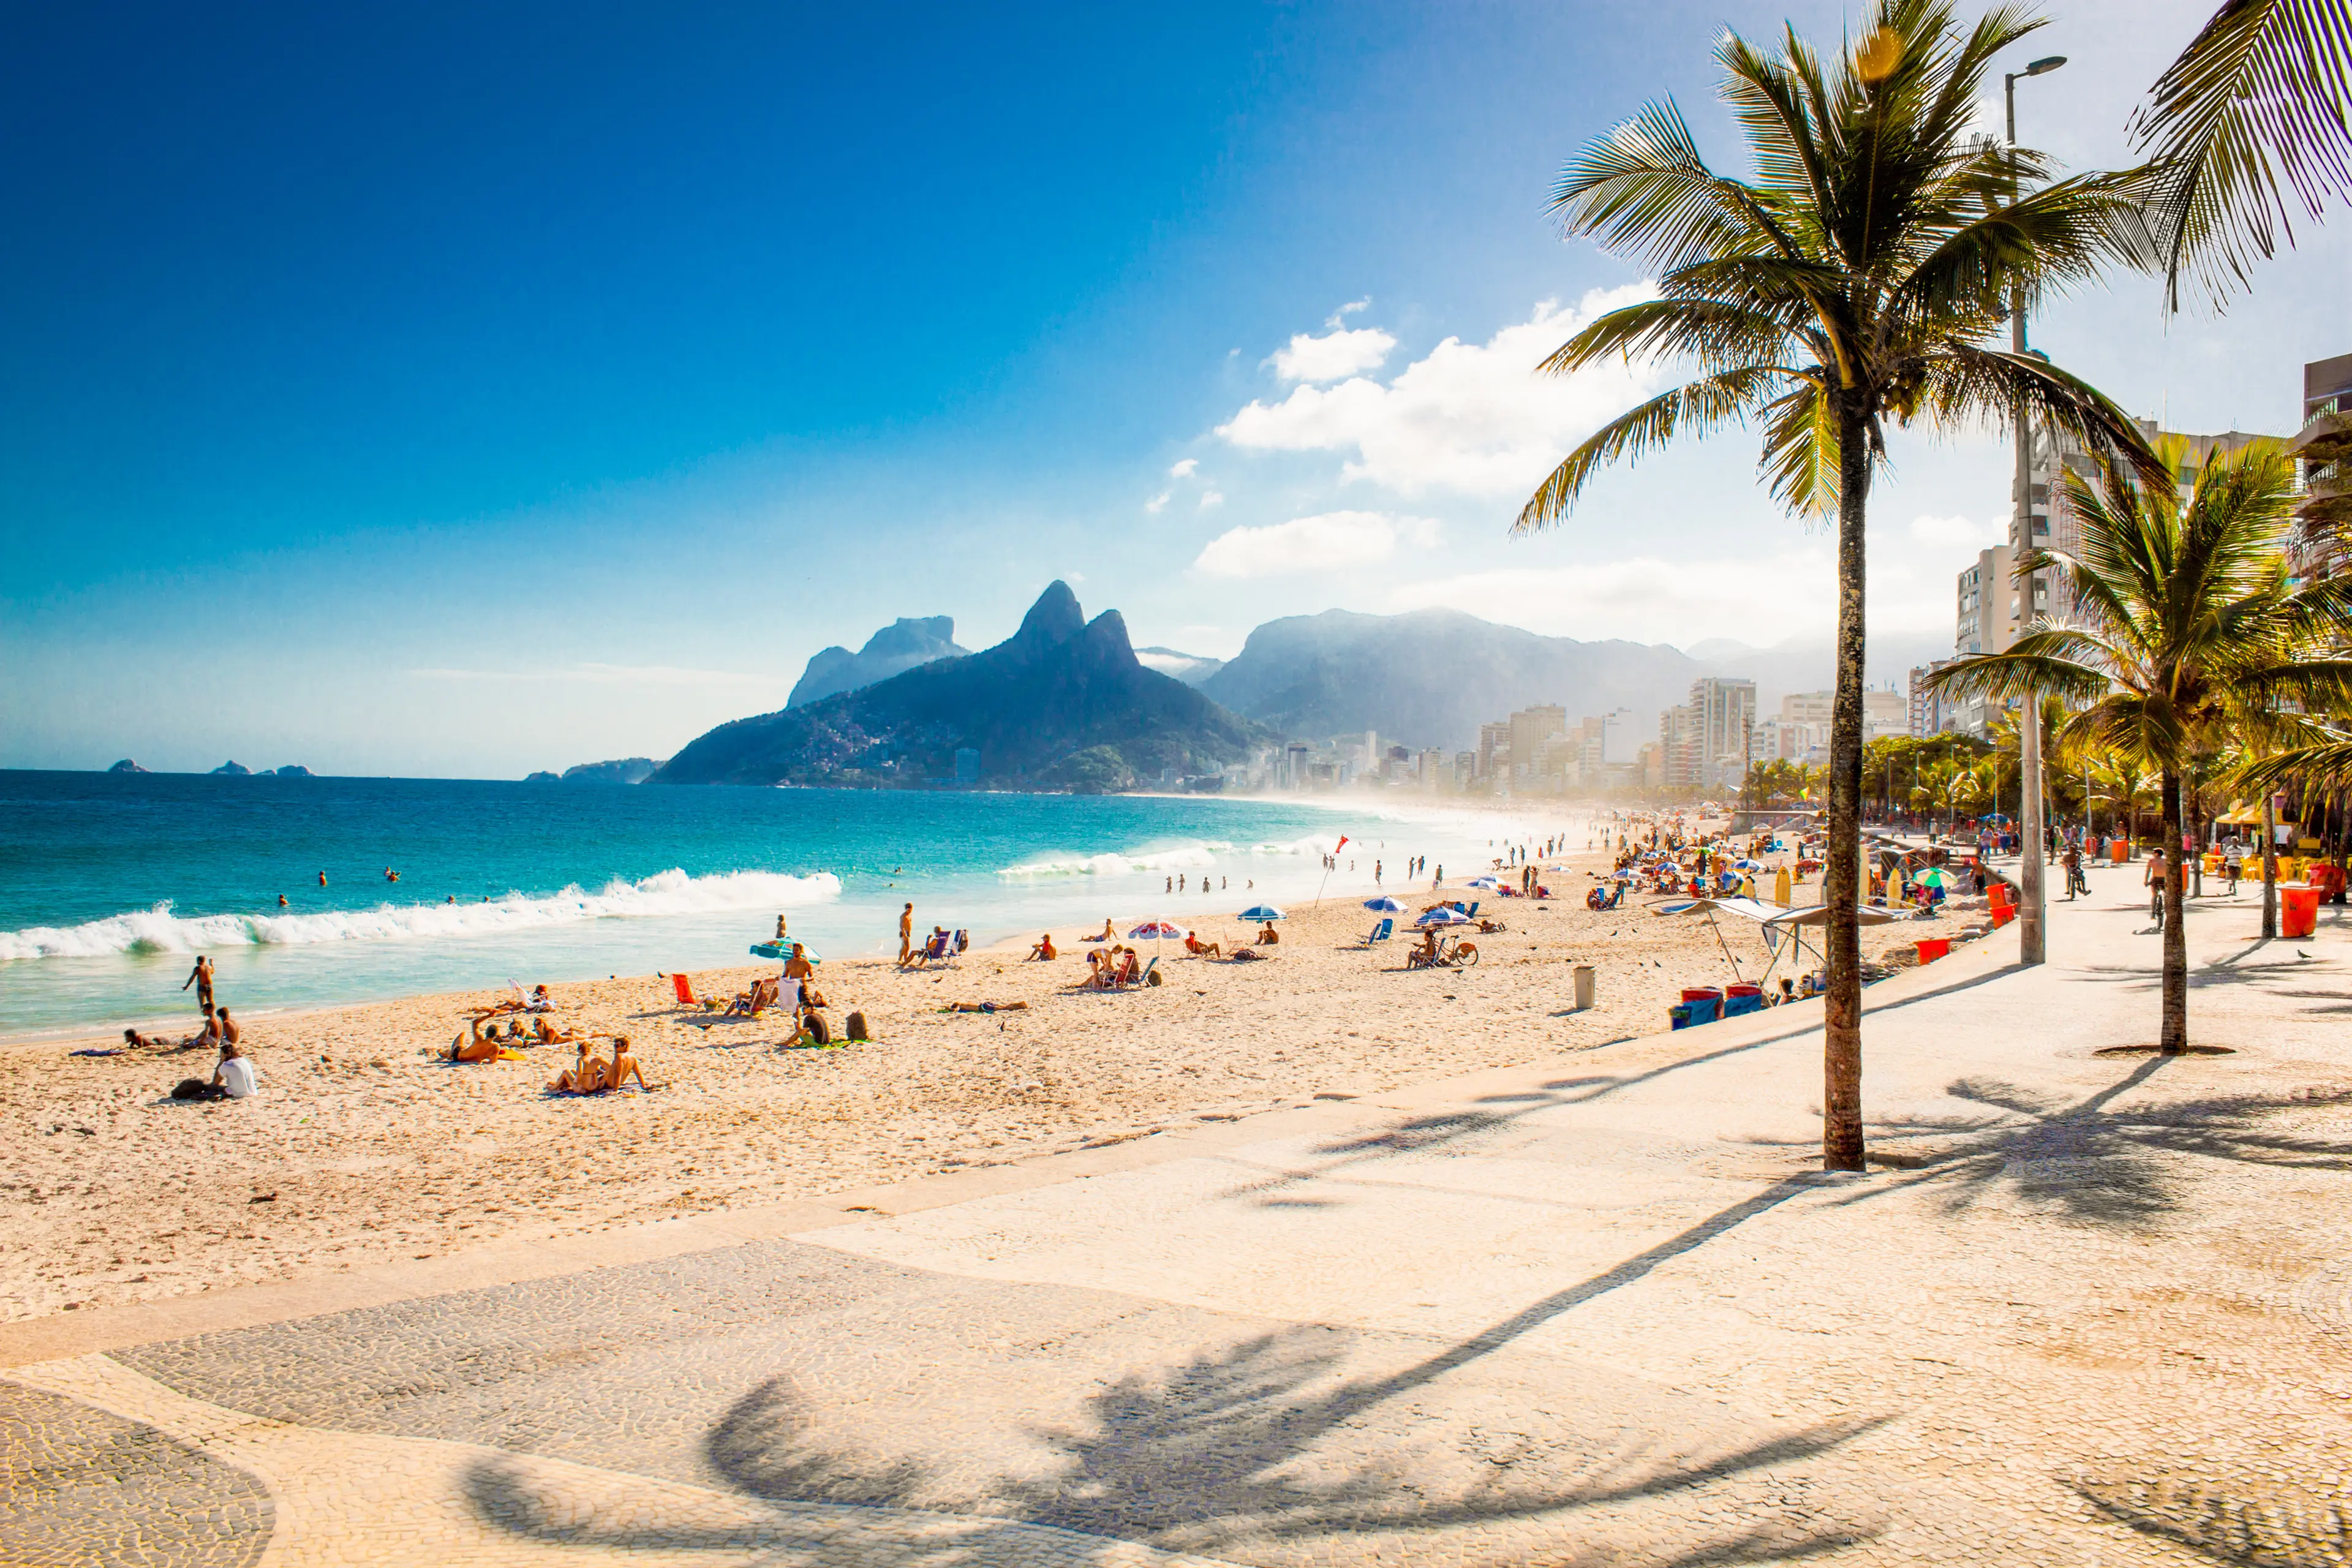 Palms and Two Brothers Mountain on Ipanema beach